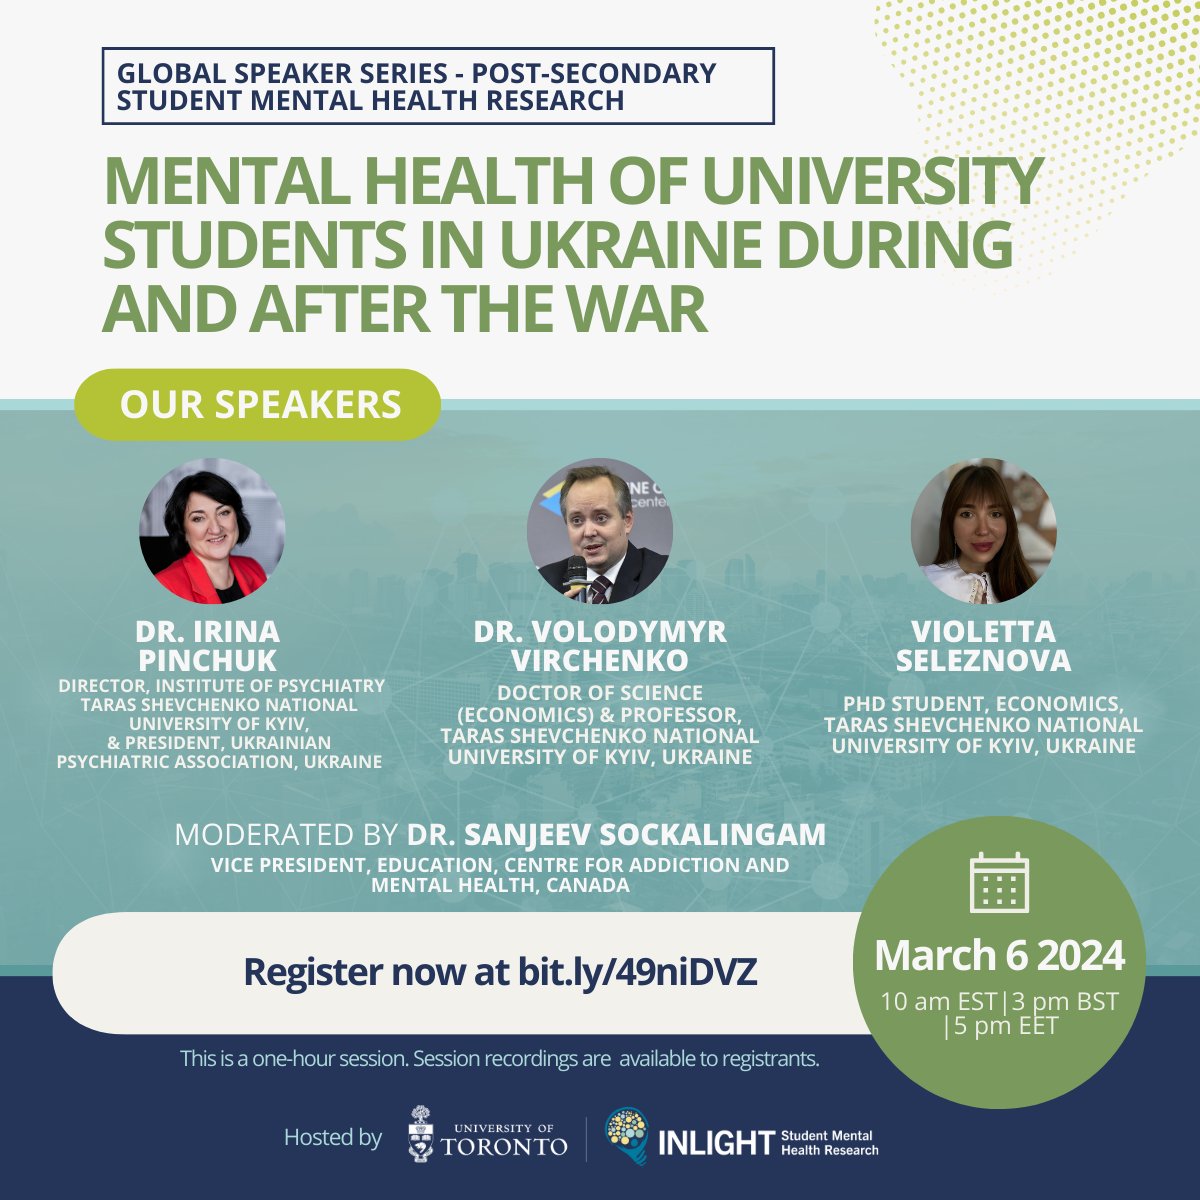 📢The #GlobalSpeakerSeries on Student Mental Health Research returns on Mar 6! Join researchers from Taras Shevchenko National University of Kyiv to discuss 'Mental Health of University Students in Ukraine During and After the War'. Register now at bit.ly/49niDVZ